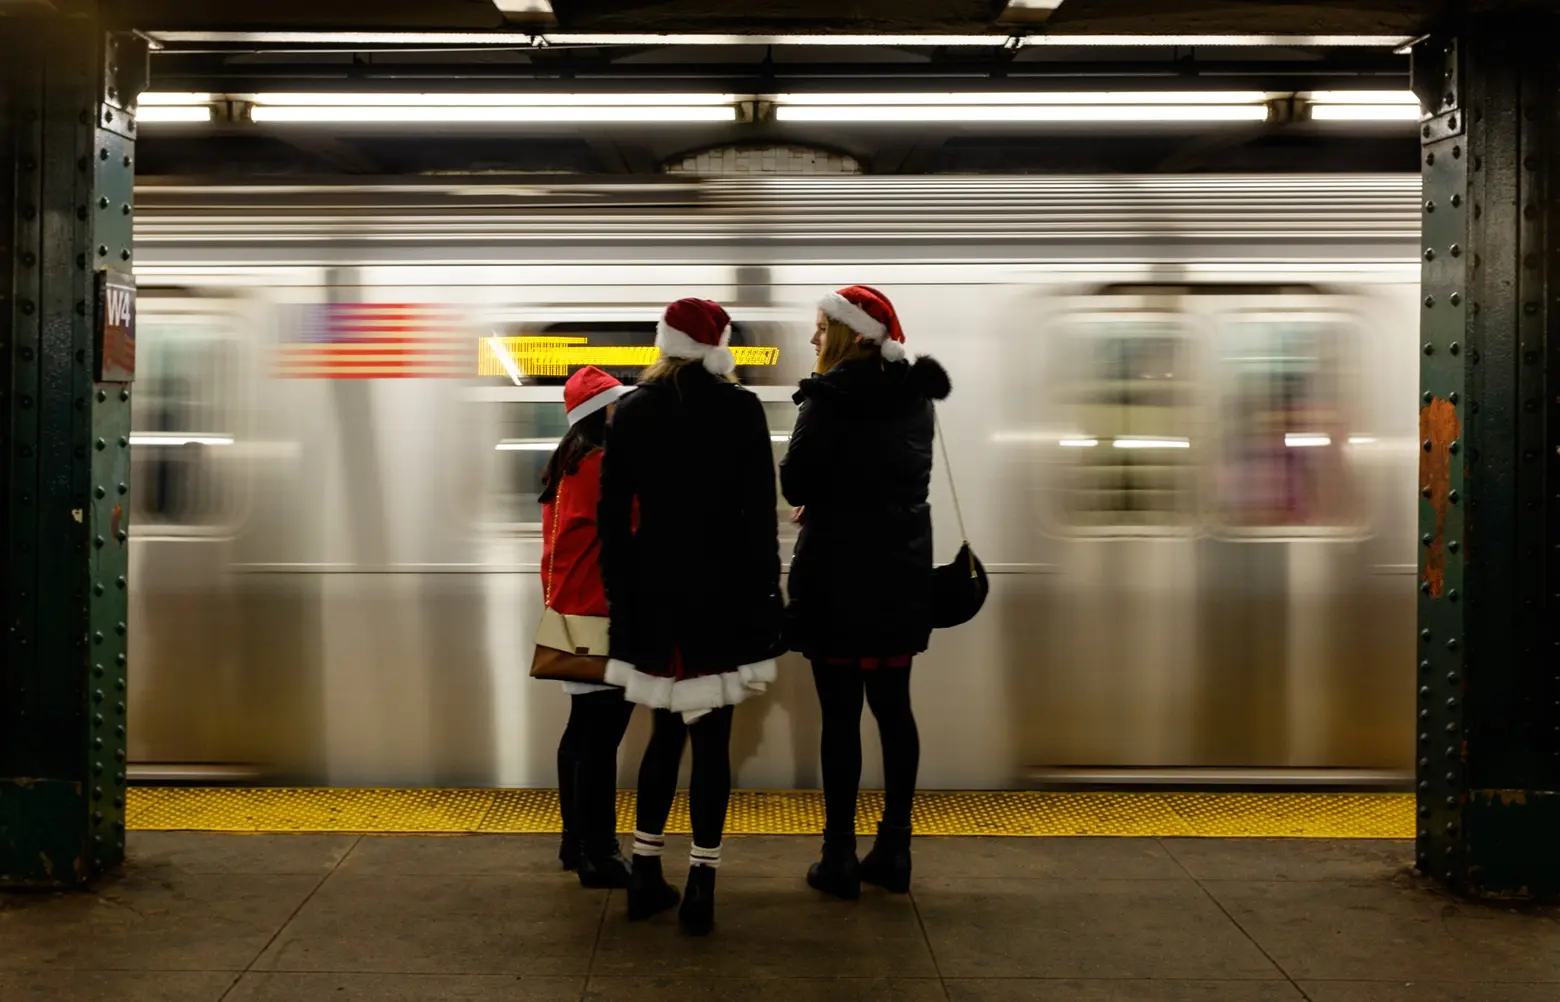 How to get around (or get out of) NYC this Christmas